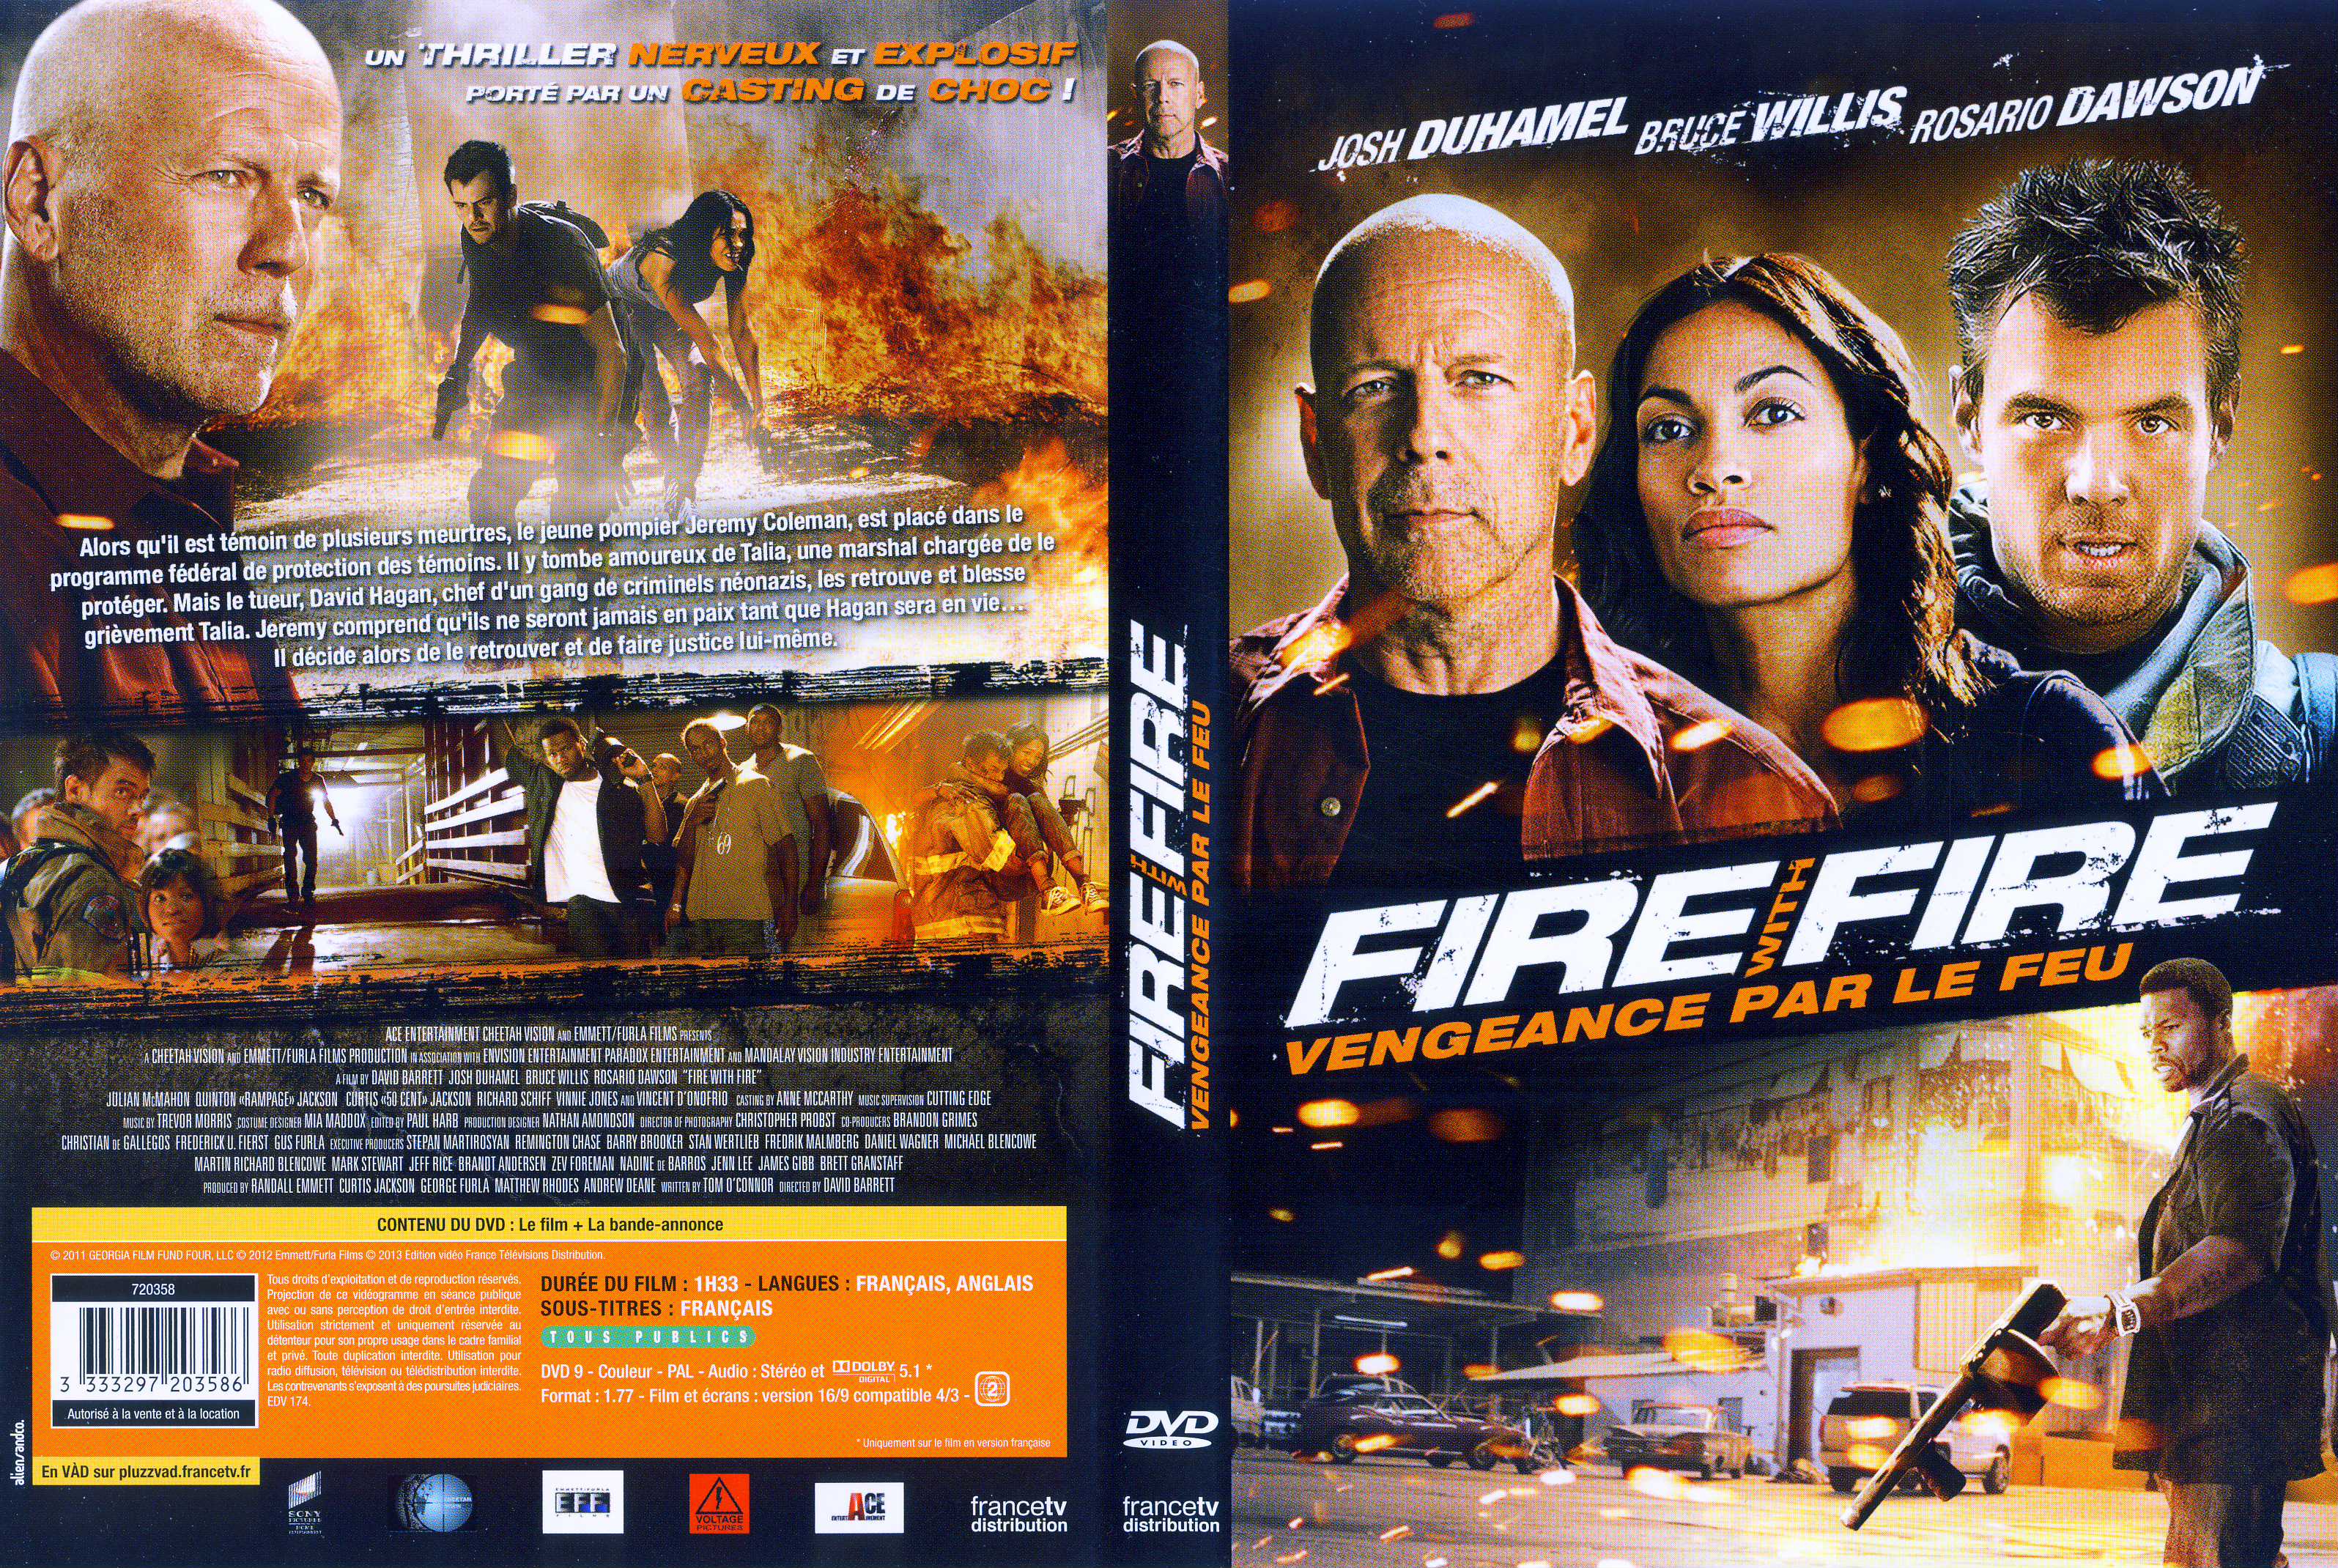 Jaquette DVD Fire with Fire